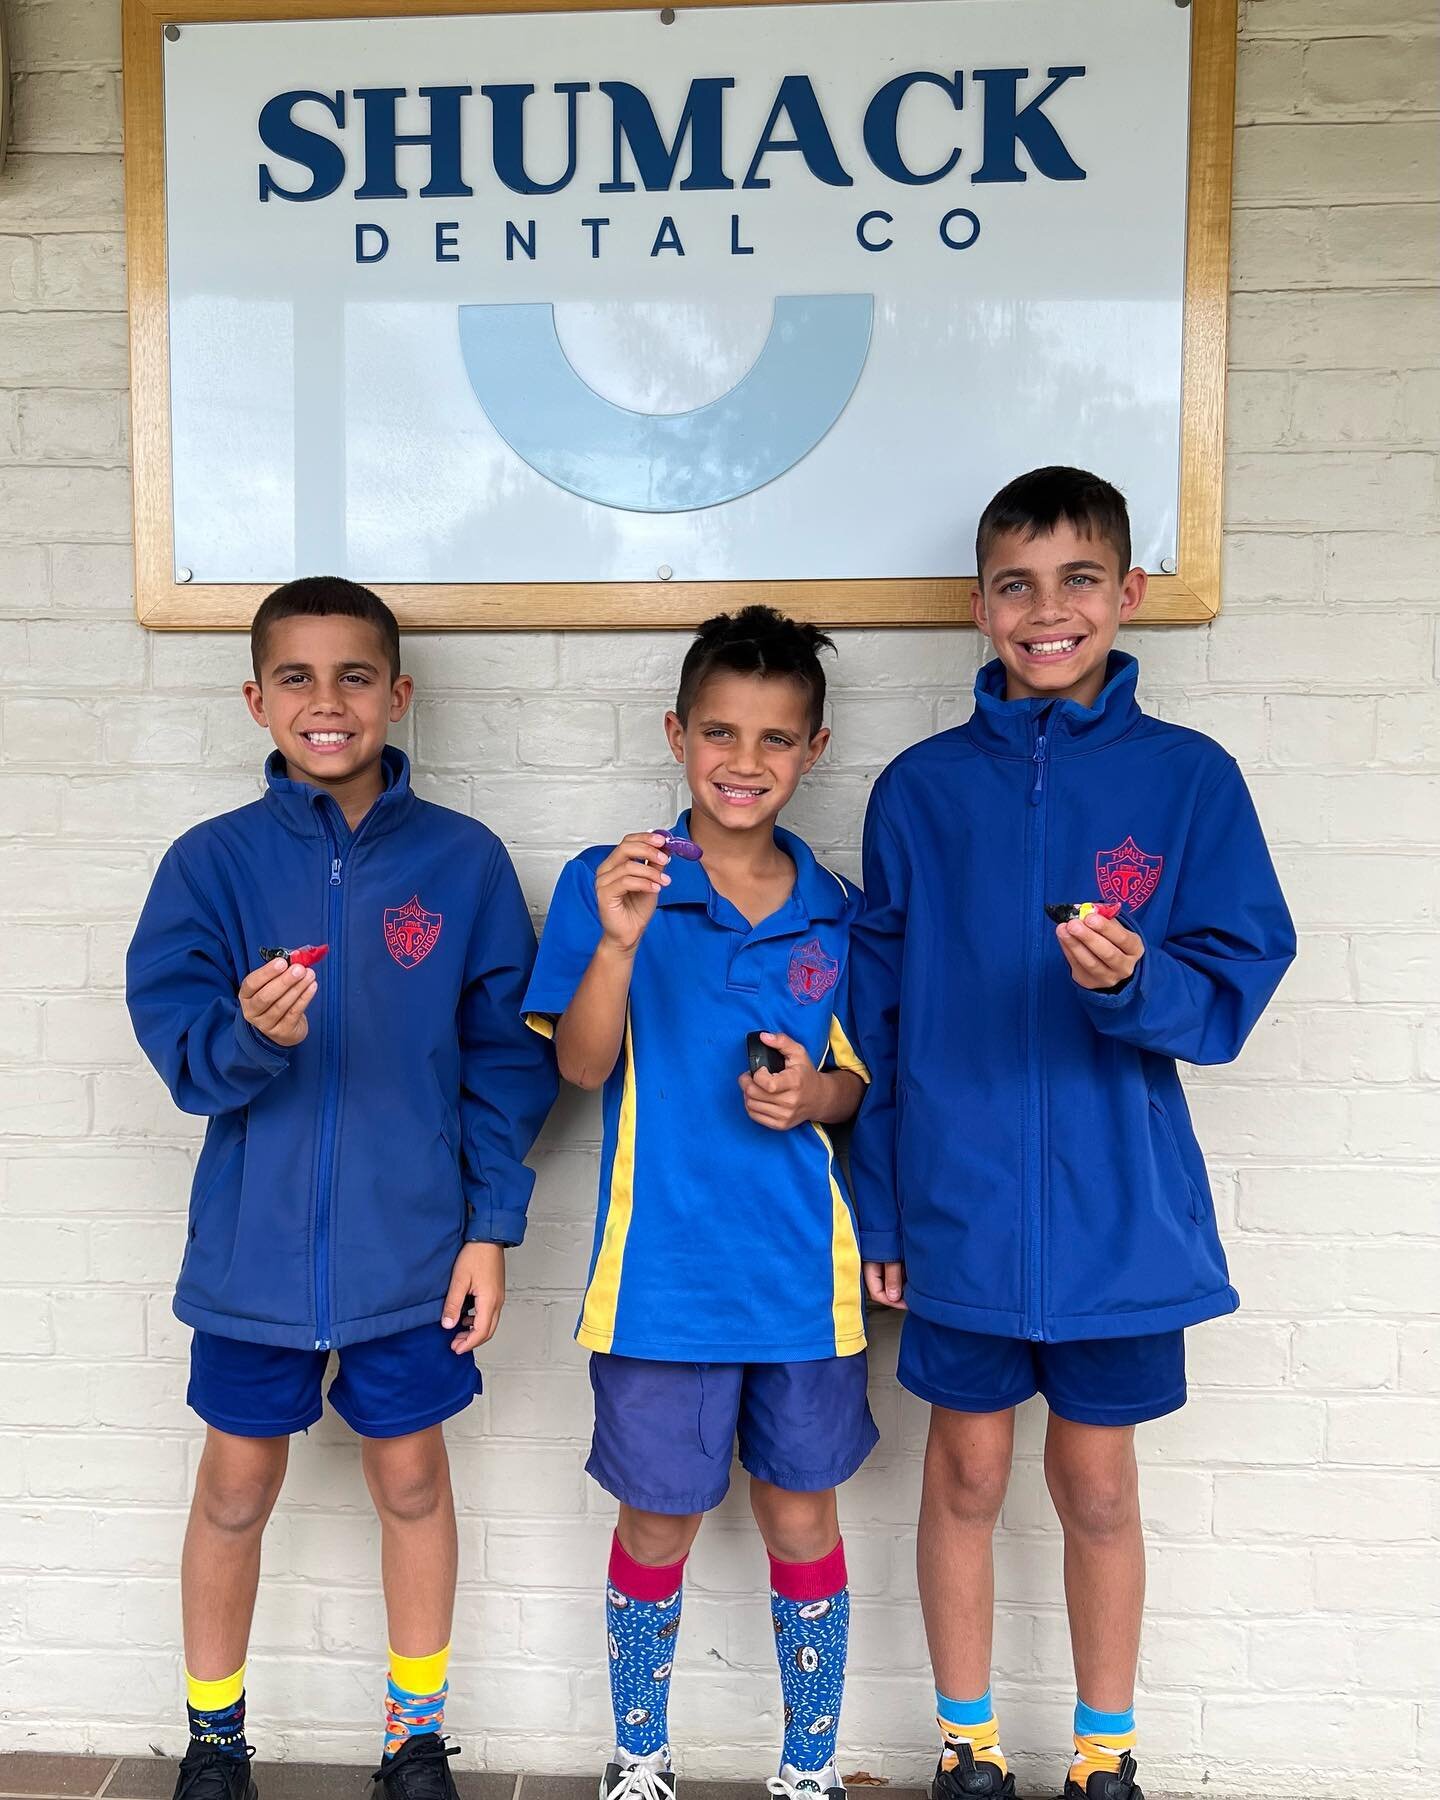 The Penrith family boys ready for a big weekend of sport with their new custom fit mouthguards. Check out their family page Ballin 🏀n Sacred Land @ballinonsacredland 😎